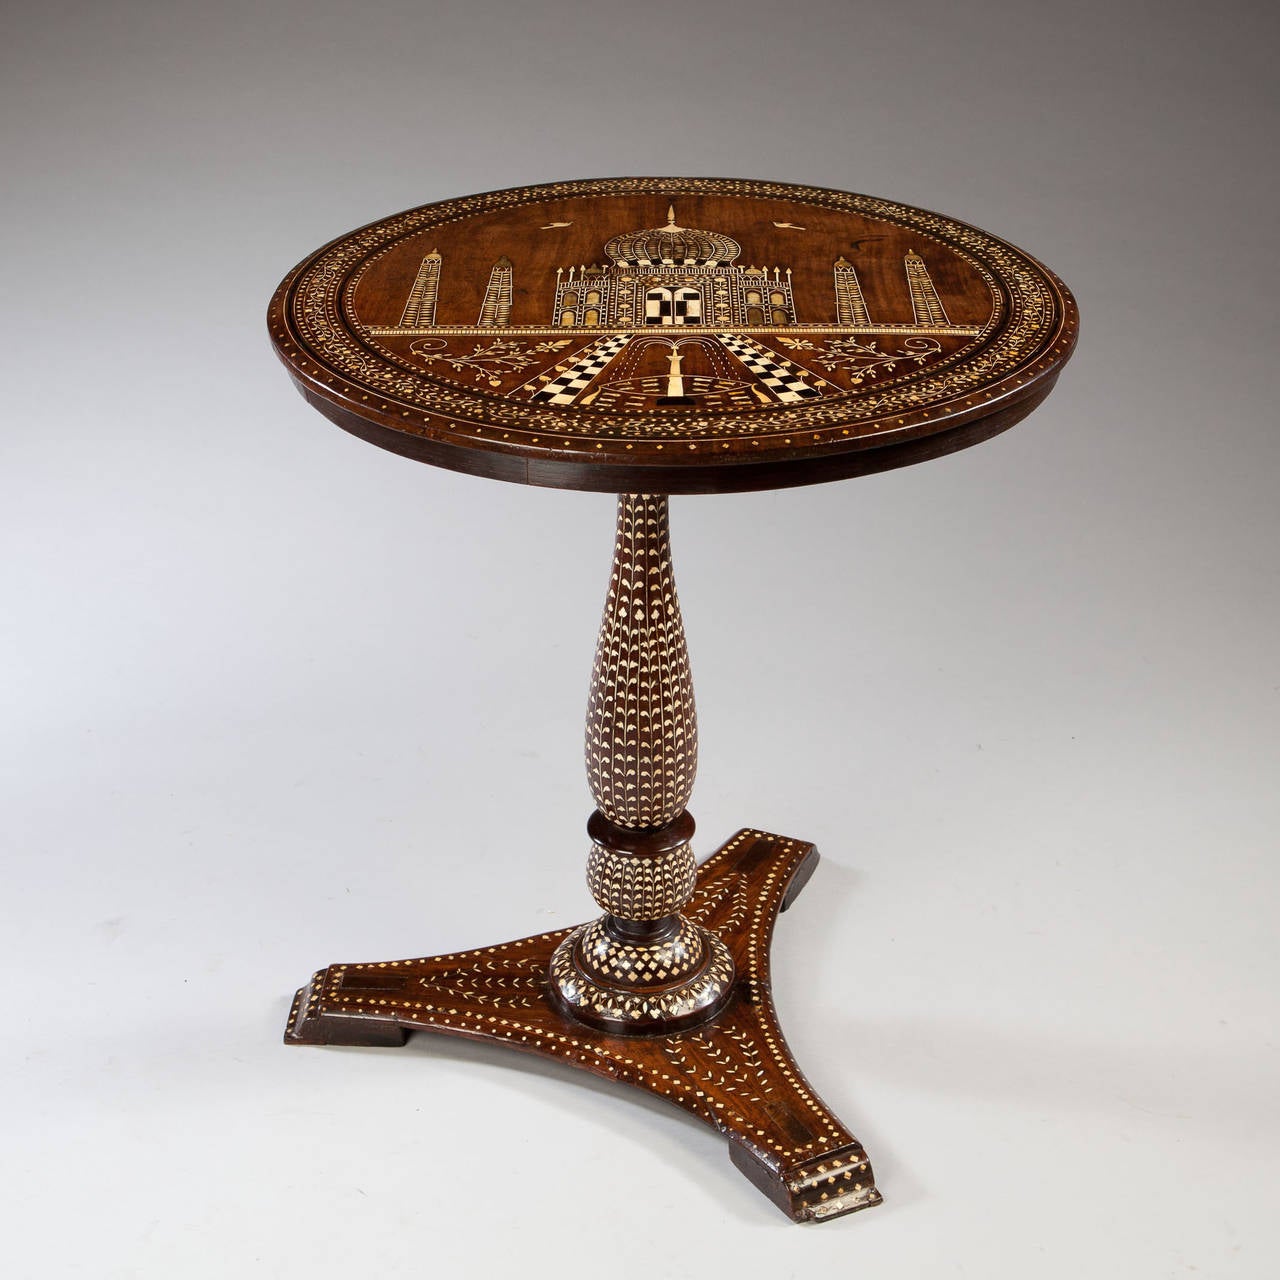 An exceptional early 19th century padouk occasional table inlaid with bone throughout, the top decorated with the Taj Mahal which was built by the Emperor Shah Jahan in memory of his beloved wife Mumtaz Mahal.